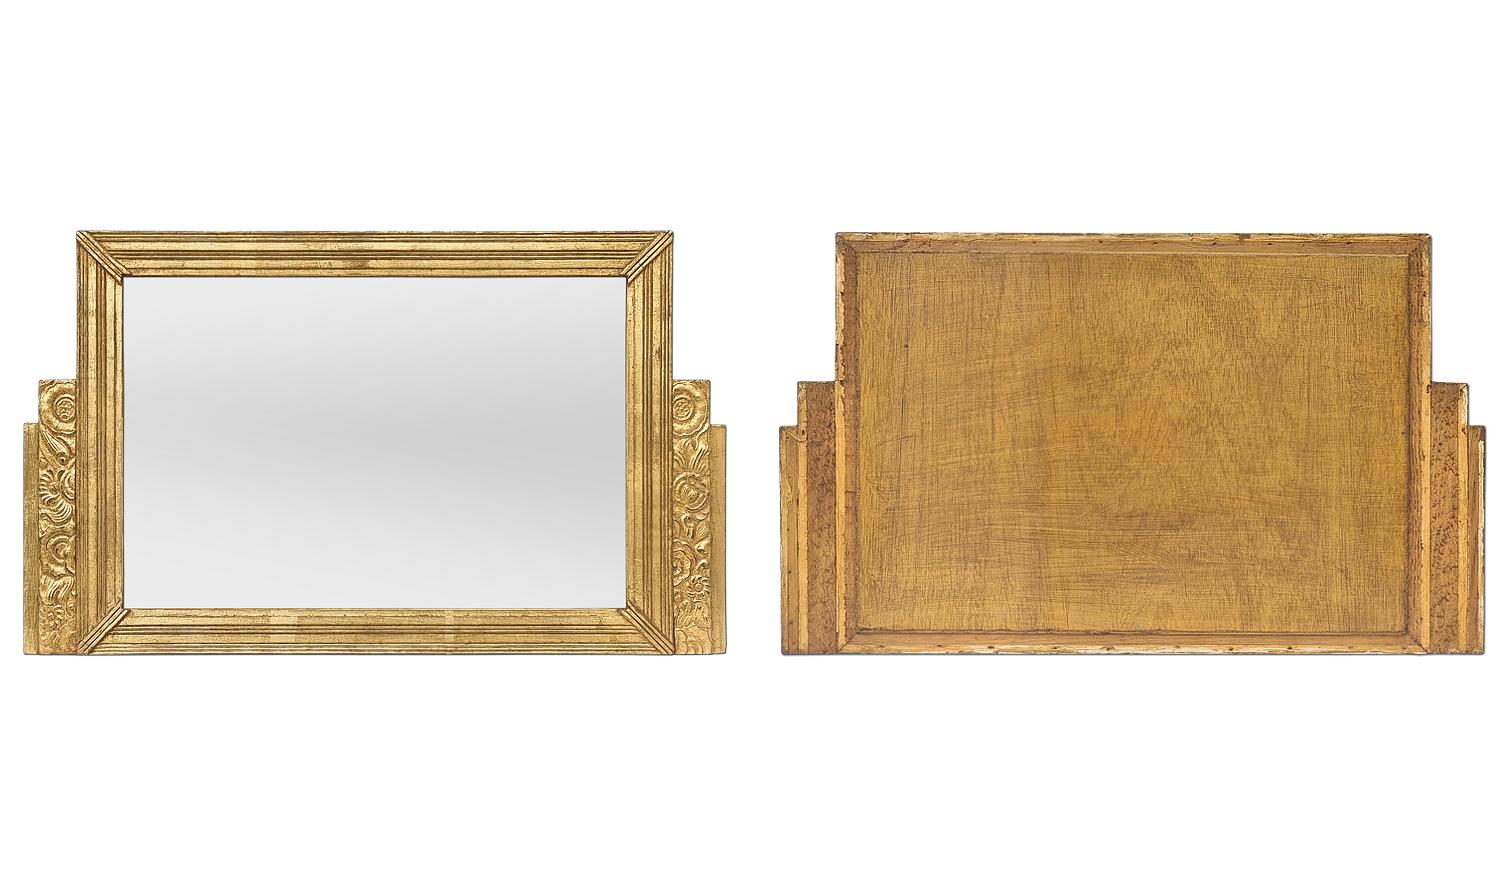 Antique French Art Deco Period Giltwood Wall Mirror, circa 1925 For Sale 2